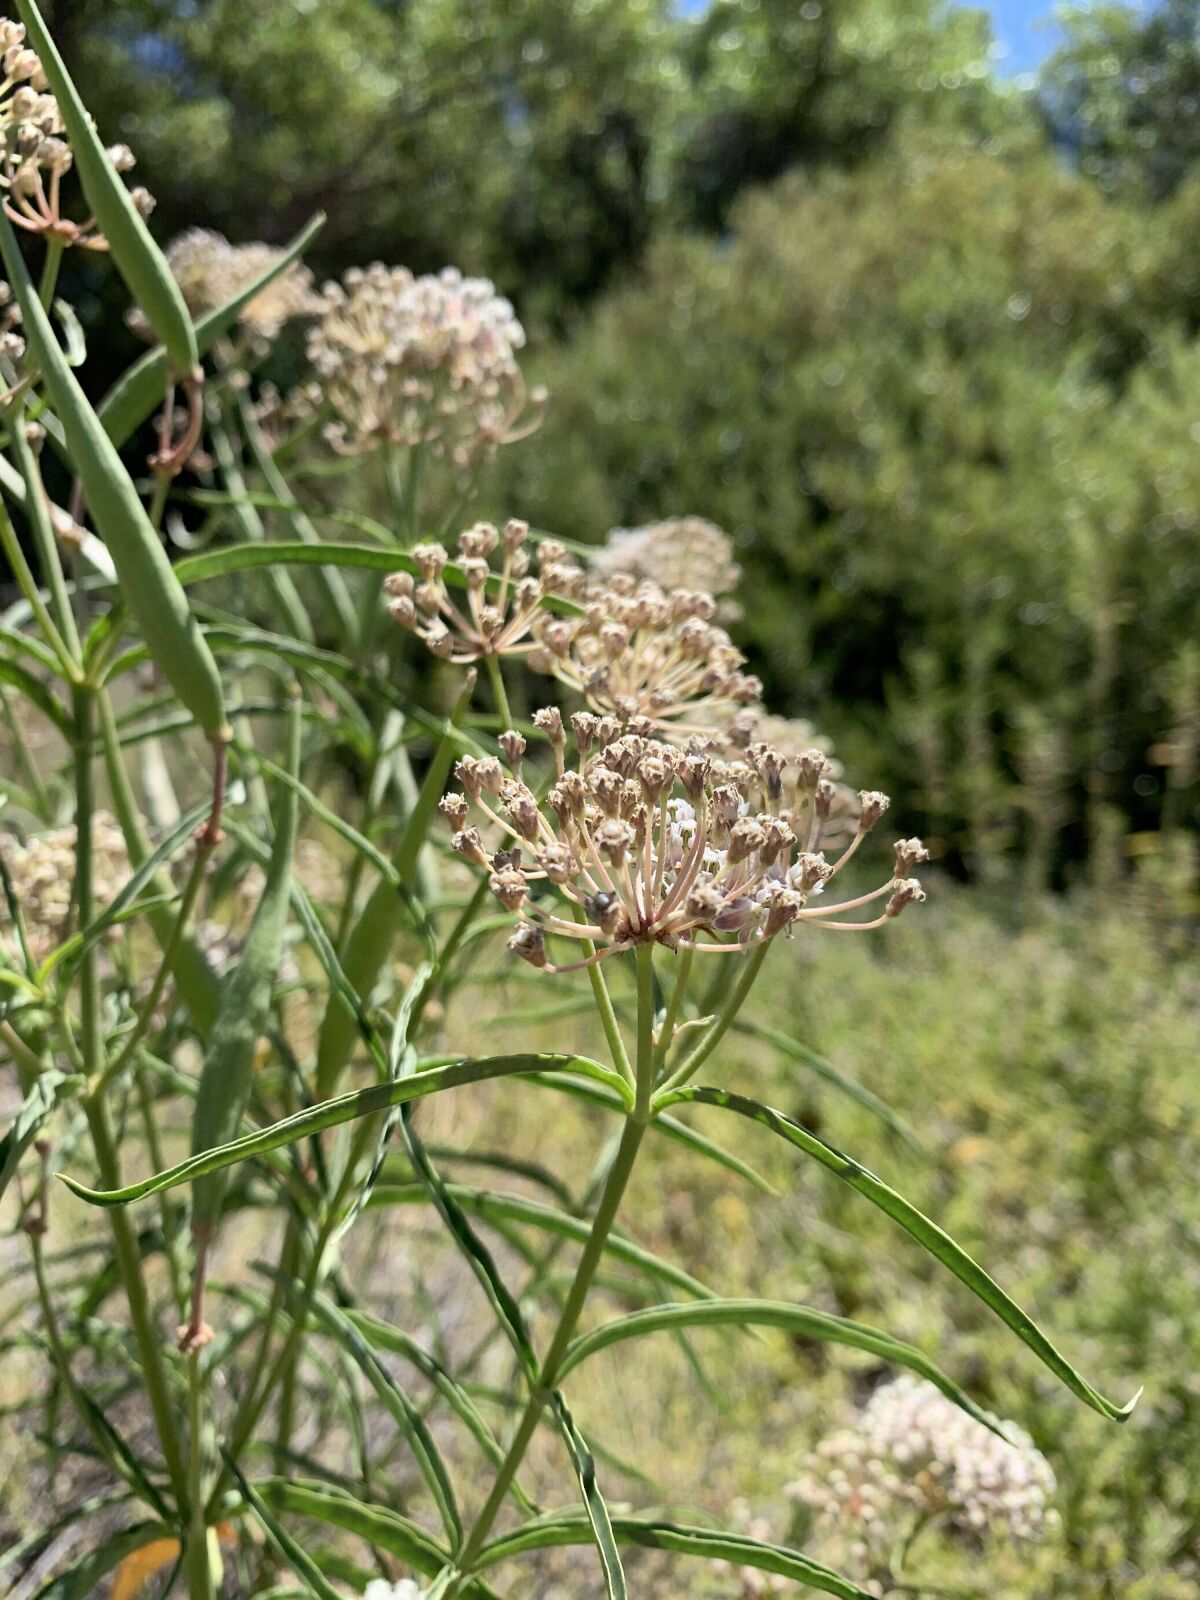 Narrowleaf milkweed (Asclepias fascicularis) is a native variety with clusters of tiny pink flowers.